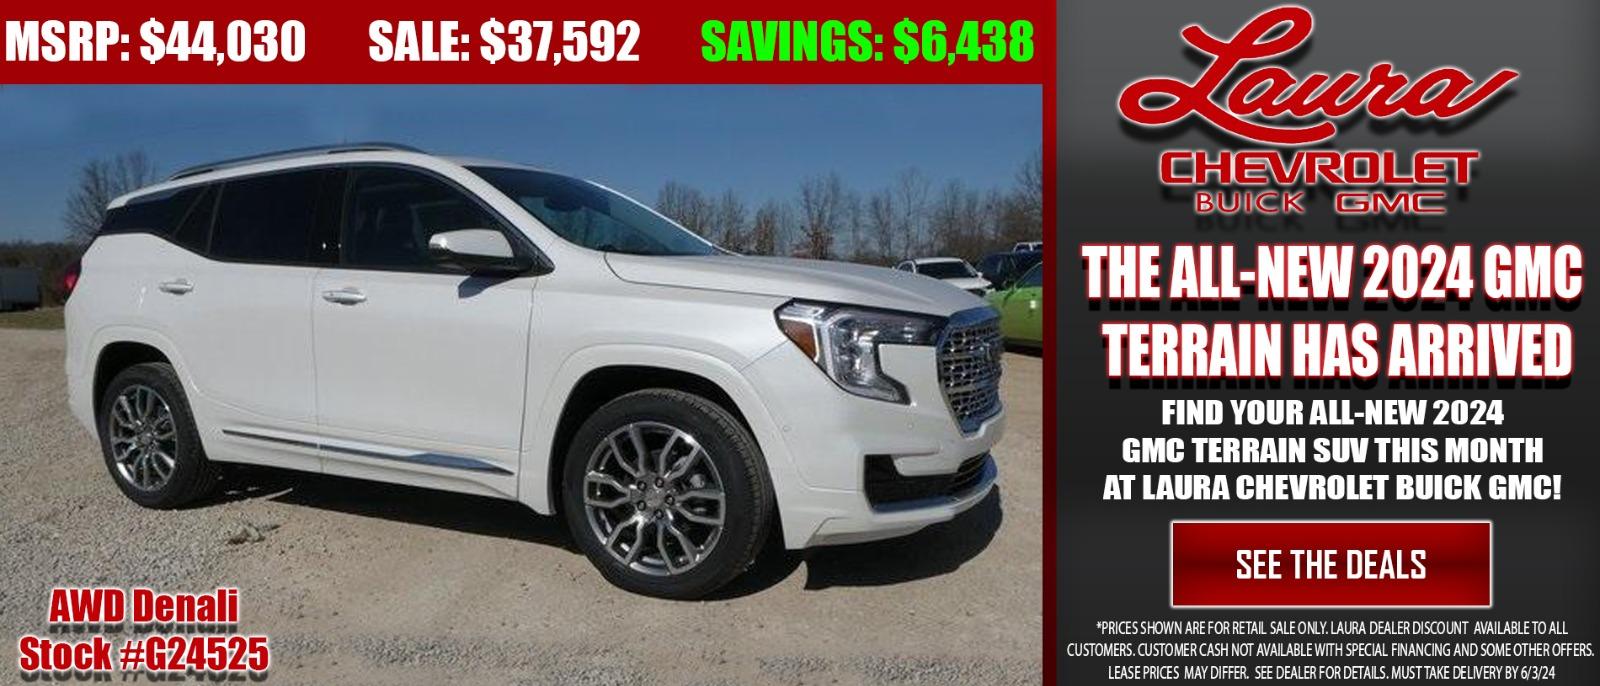 Find your new 2024 GMC Terrain this month at Laura!